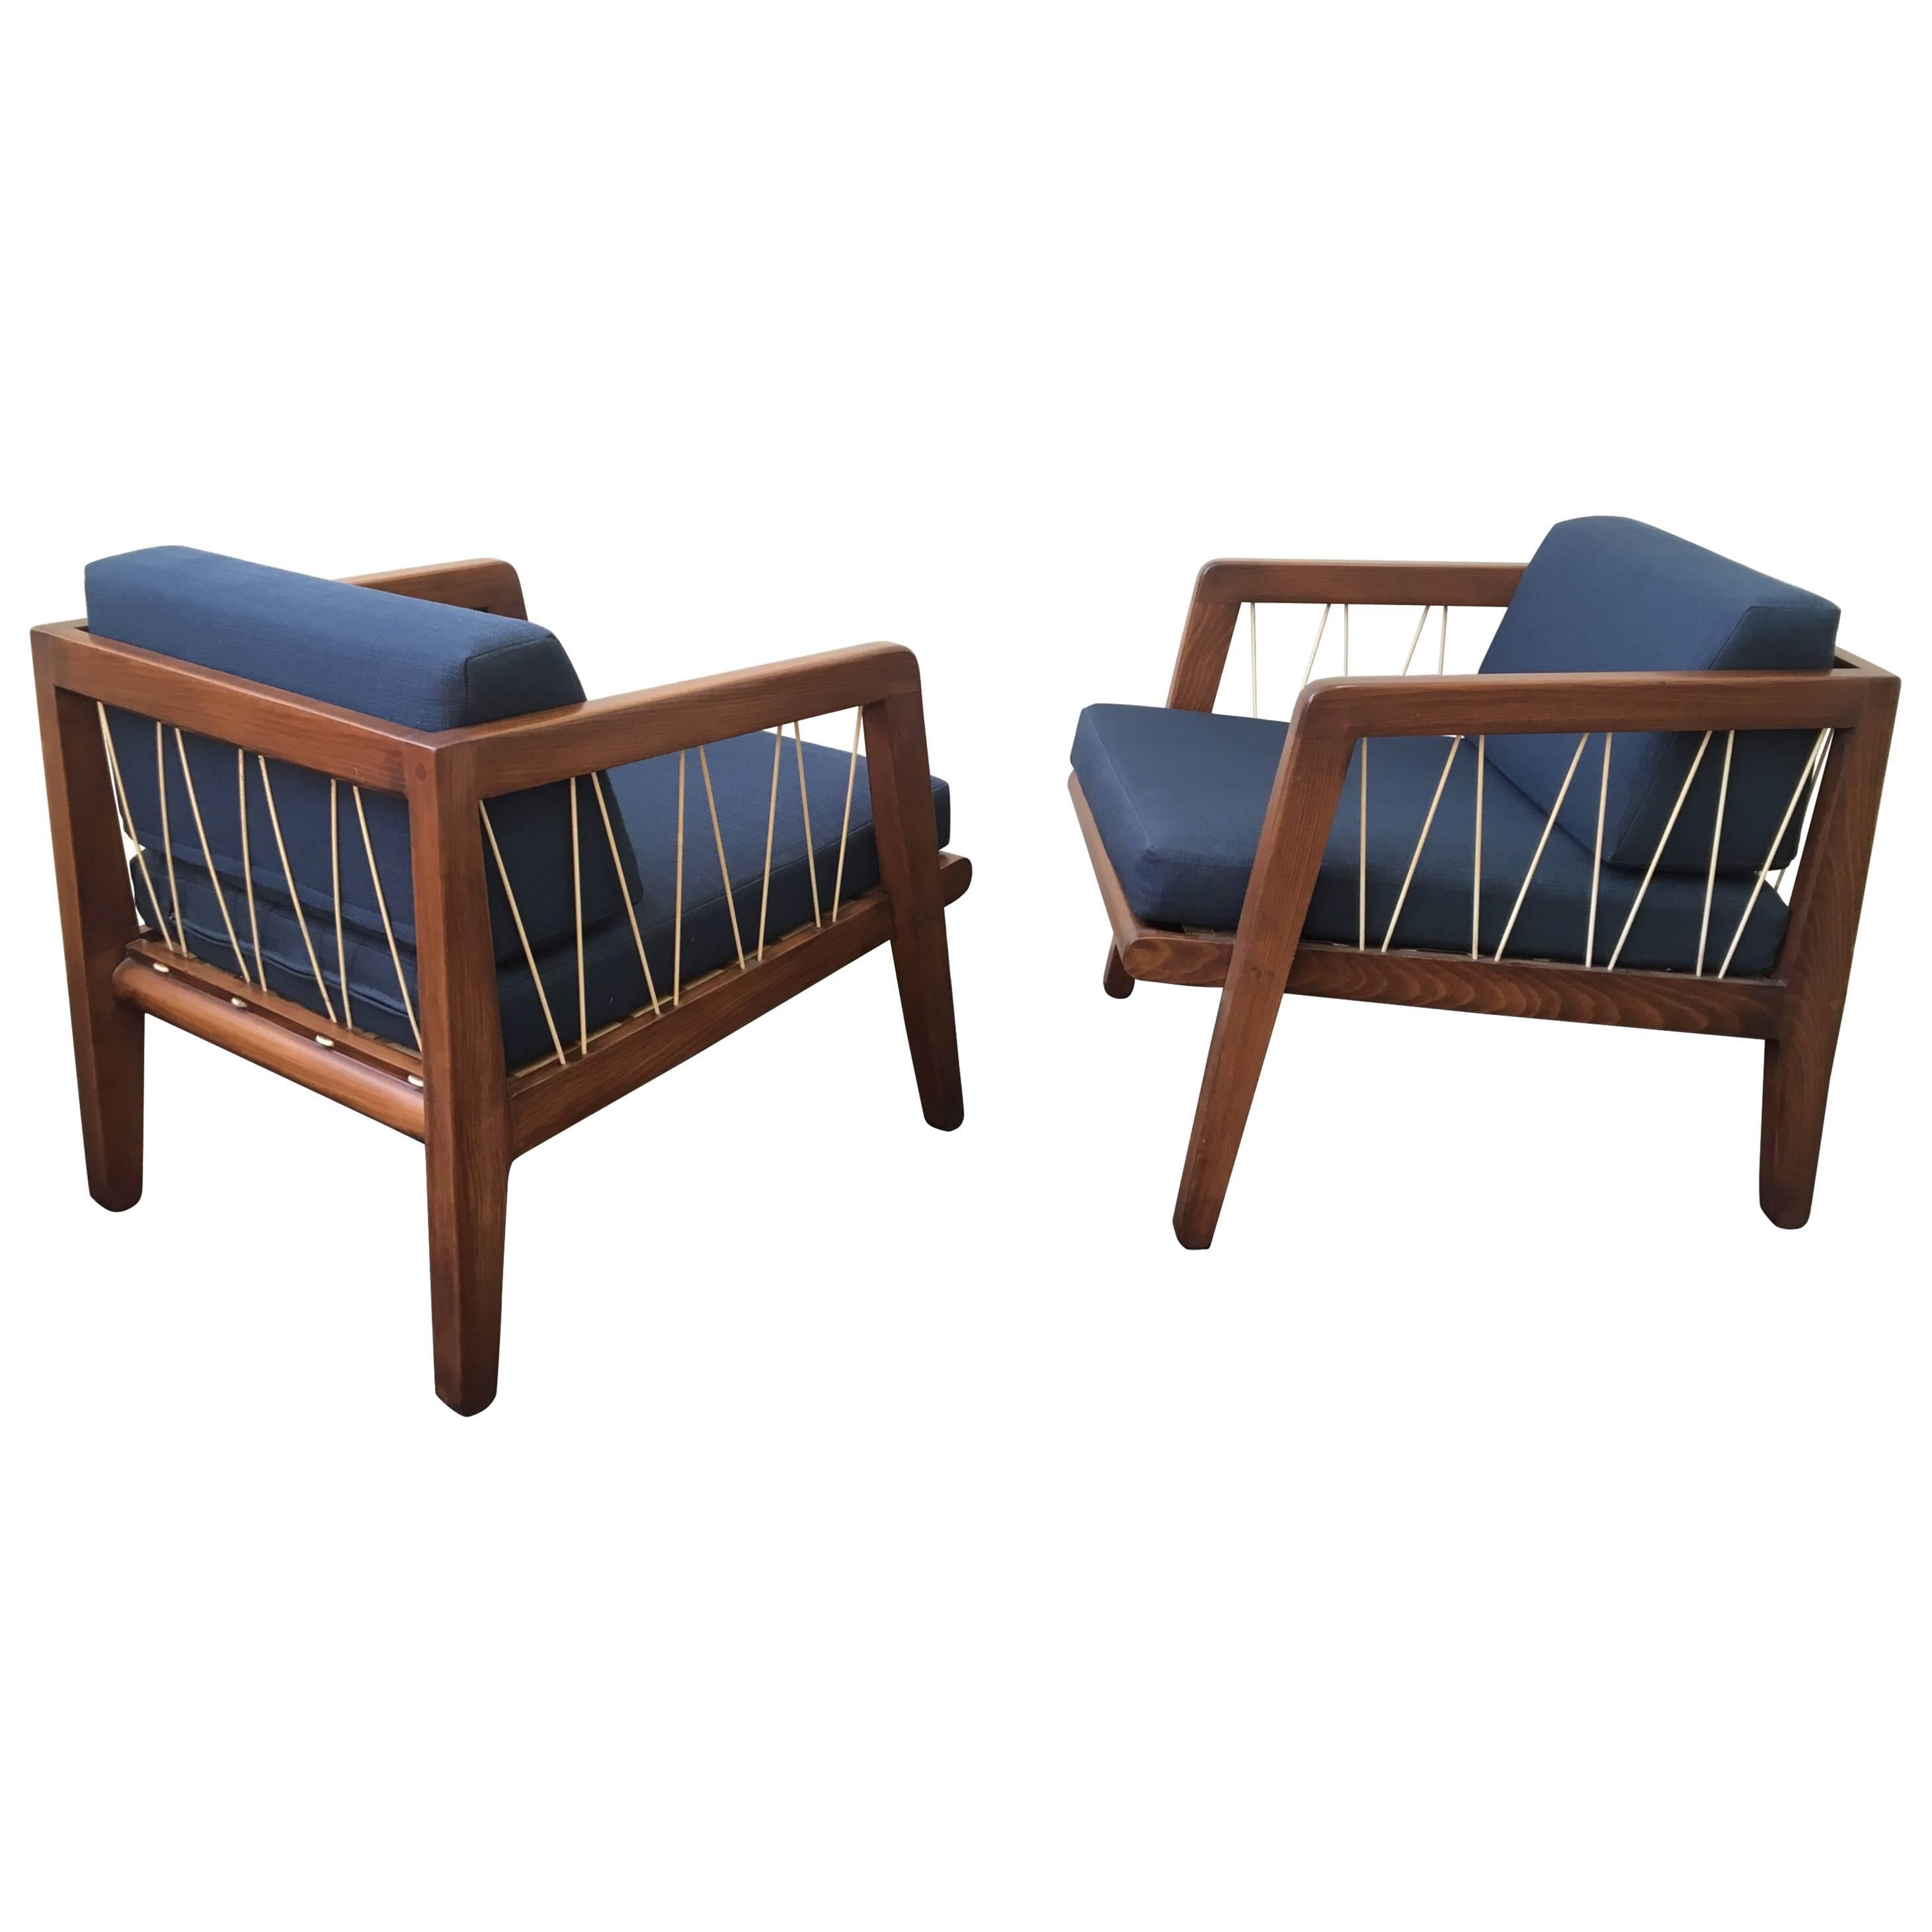 Pair of Lounge Chairs by Edward Wormley for Drexel